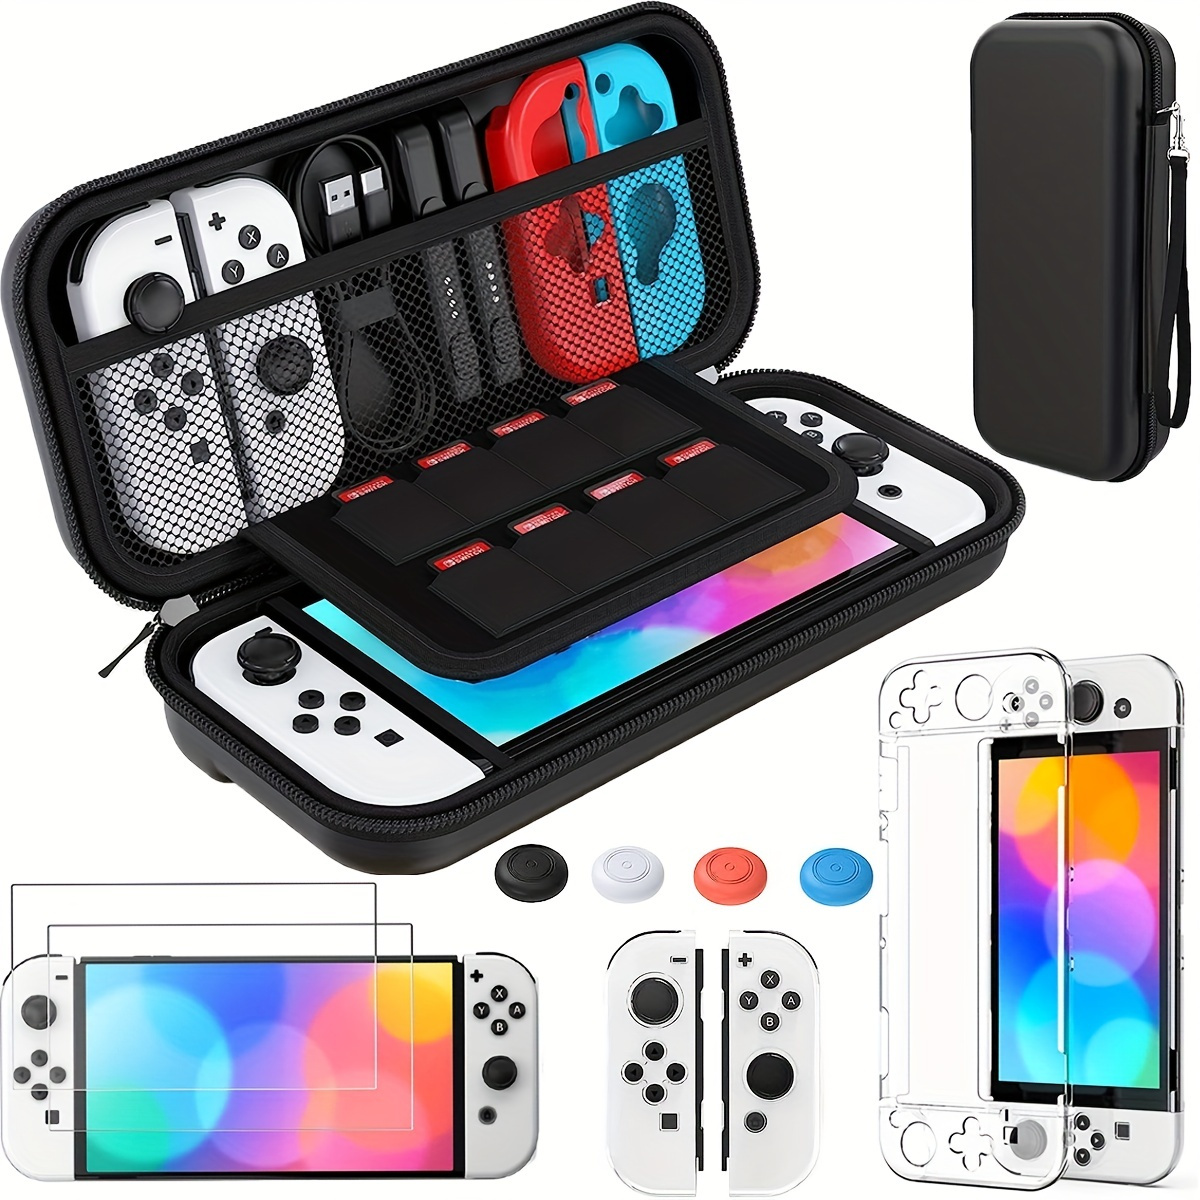 

Switch Oled Case Compatible With Switch Oled Model 2021, 9 In 1 Accessories For Switch Oled Model With Dockable Protective Case, Hd Screen Protector And 4 Pcs Thumb Grip Caps Accessories